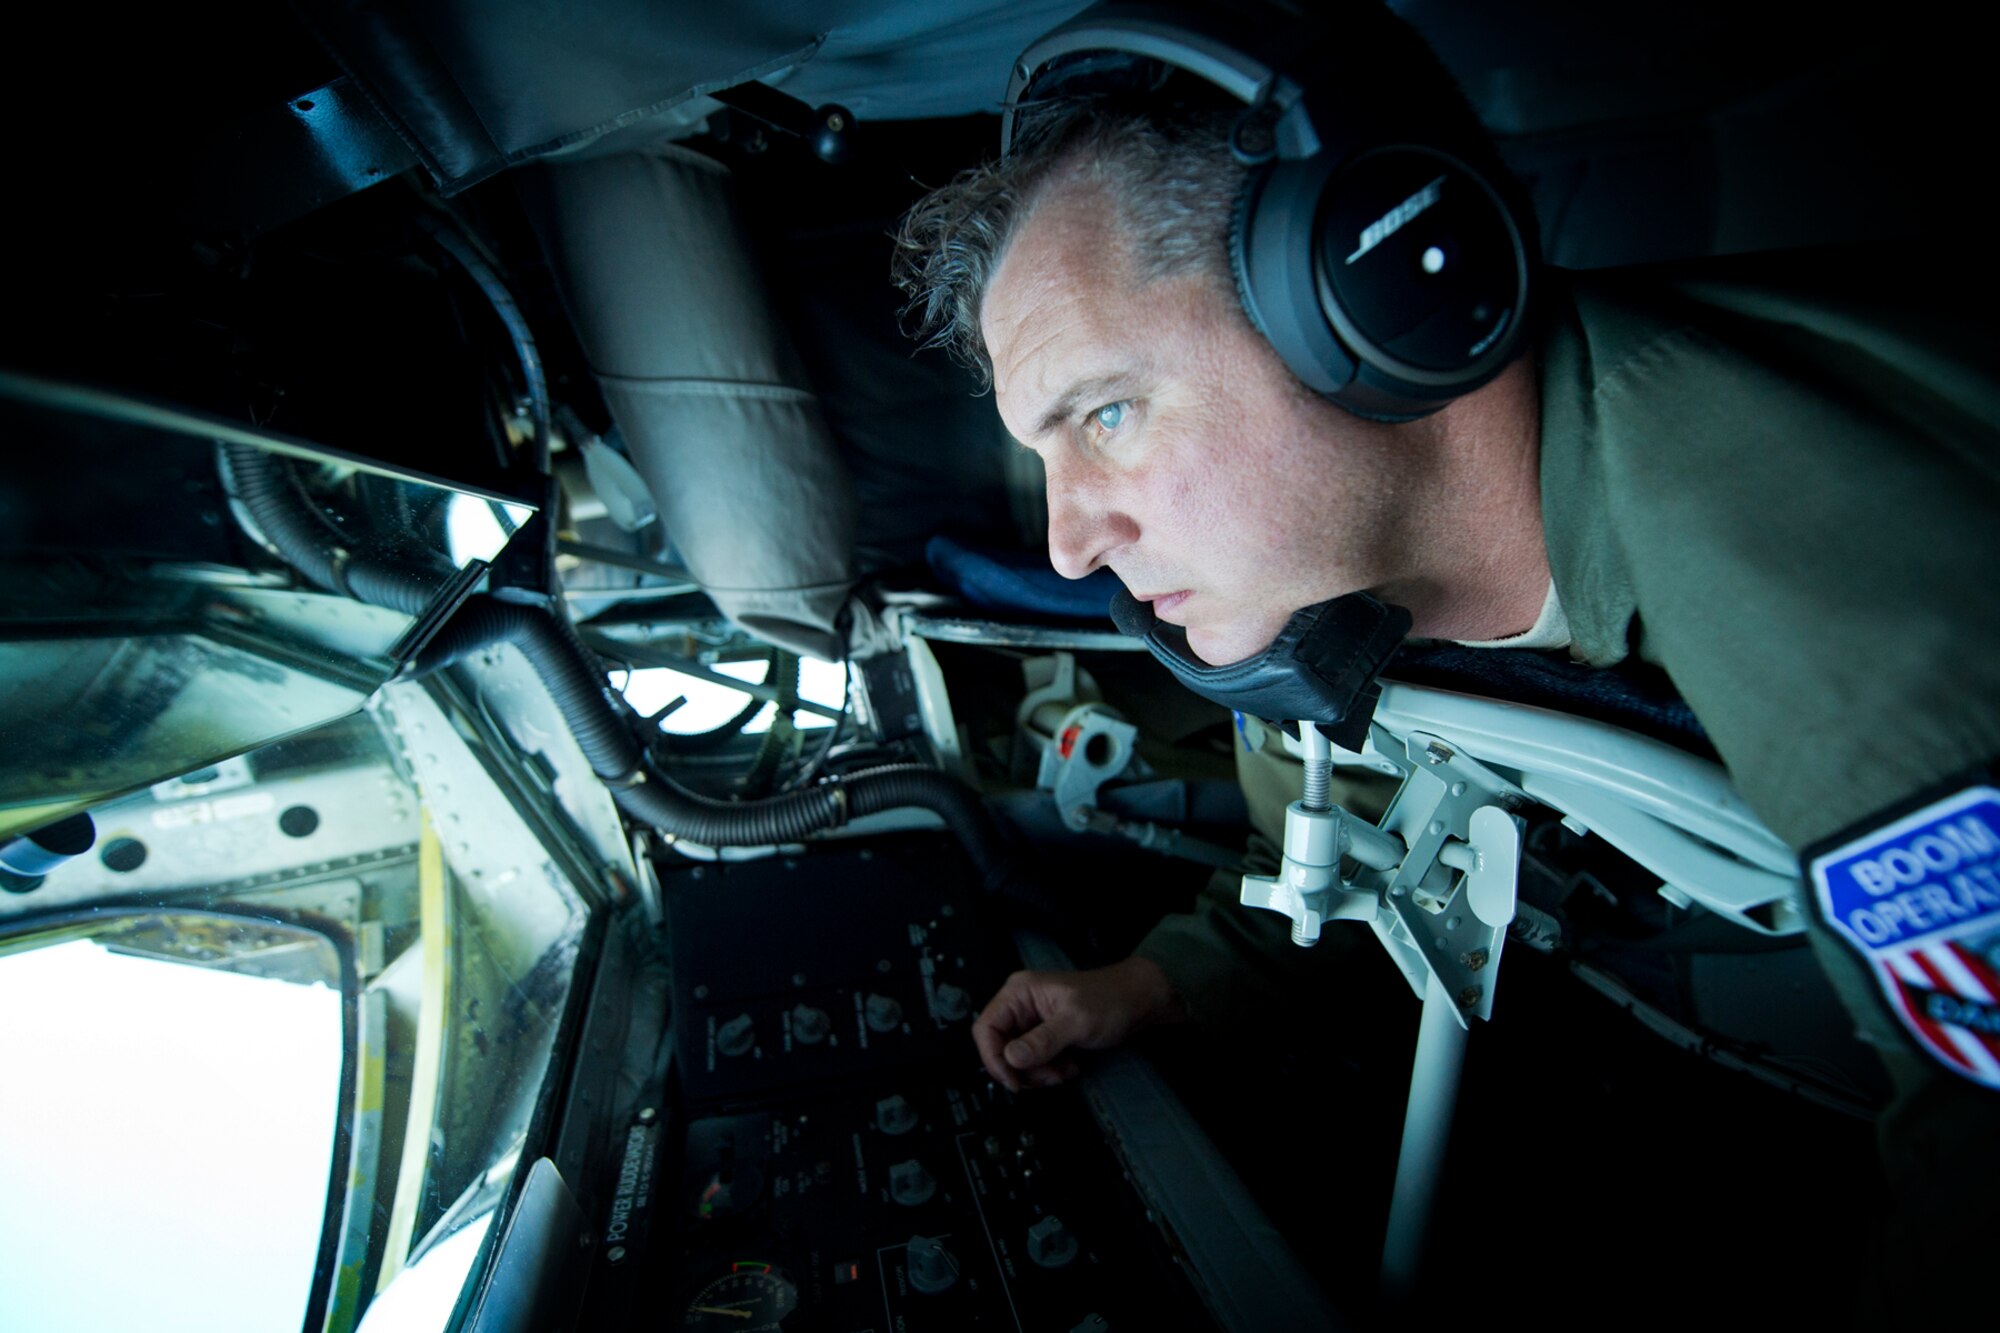 Master Sgt. Mike Morgan, 434th Air Refueling Wing boom operator, from Grissom Air Reserve Base, Indiana, operates the boom to refuel a Polish F-16 during Baltic Operations 2016 at Powidz Air Base, Poland, June 6, 2016. Deployed forces will work in tandem with naval forces to enhance flexibility and interoperability with participating NATO allies and partner nations by conducting a series of realistic, combined flying training including air defense, maritime awareness and support to amphibious operations. (U.S. Air Force photo/Senior Airman Erin Babis)